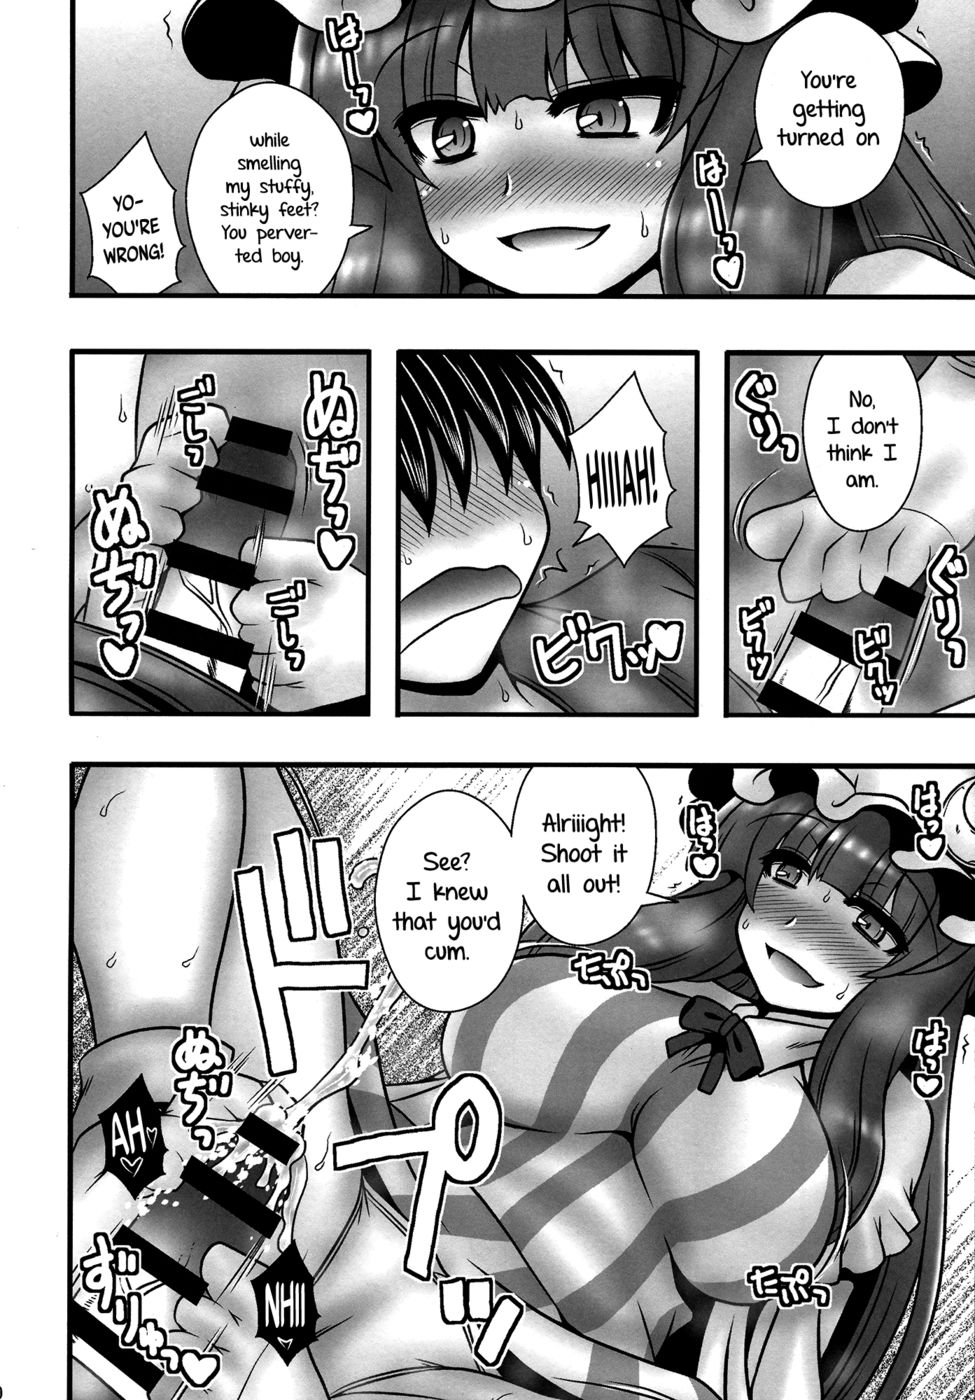 Hentai Manga Comic-The Tale of Patchouli's Reverse Rape of a Young Boy-Read-9